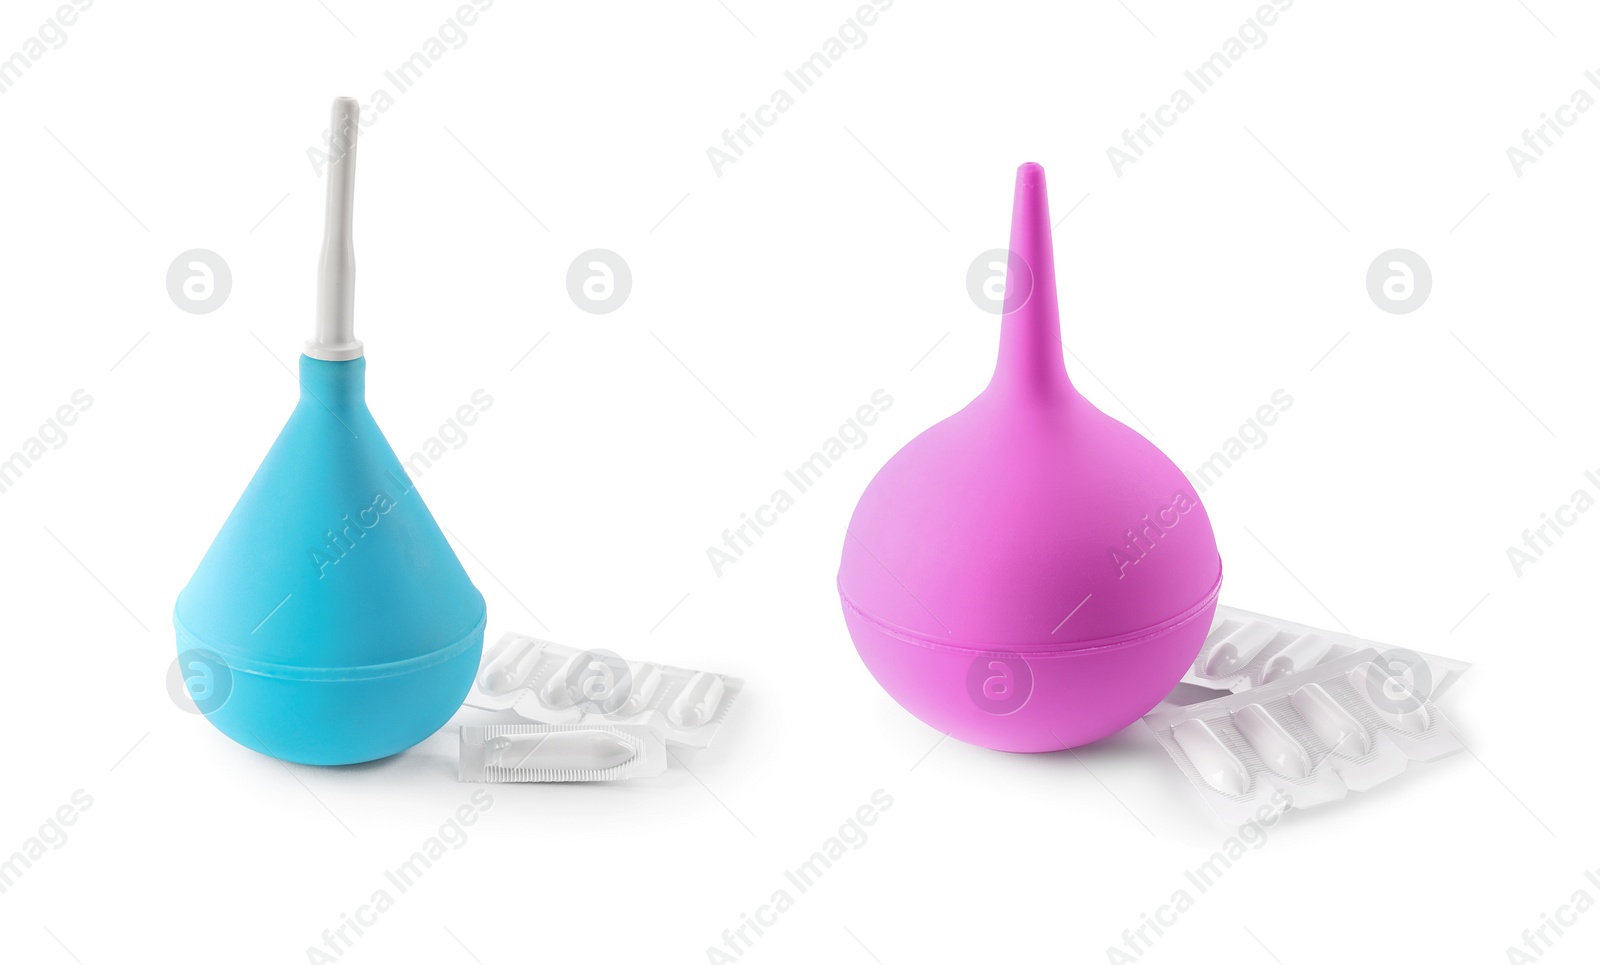 Image of Different enemas and suppositories on white background 